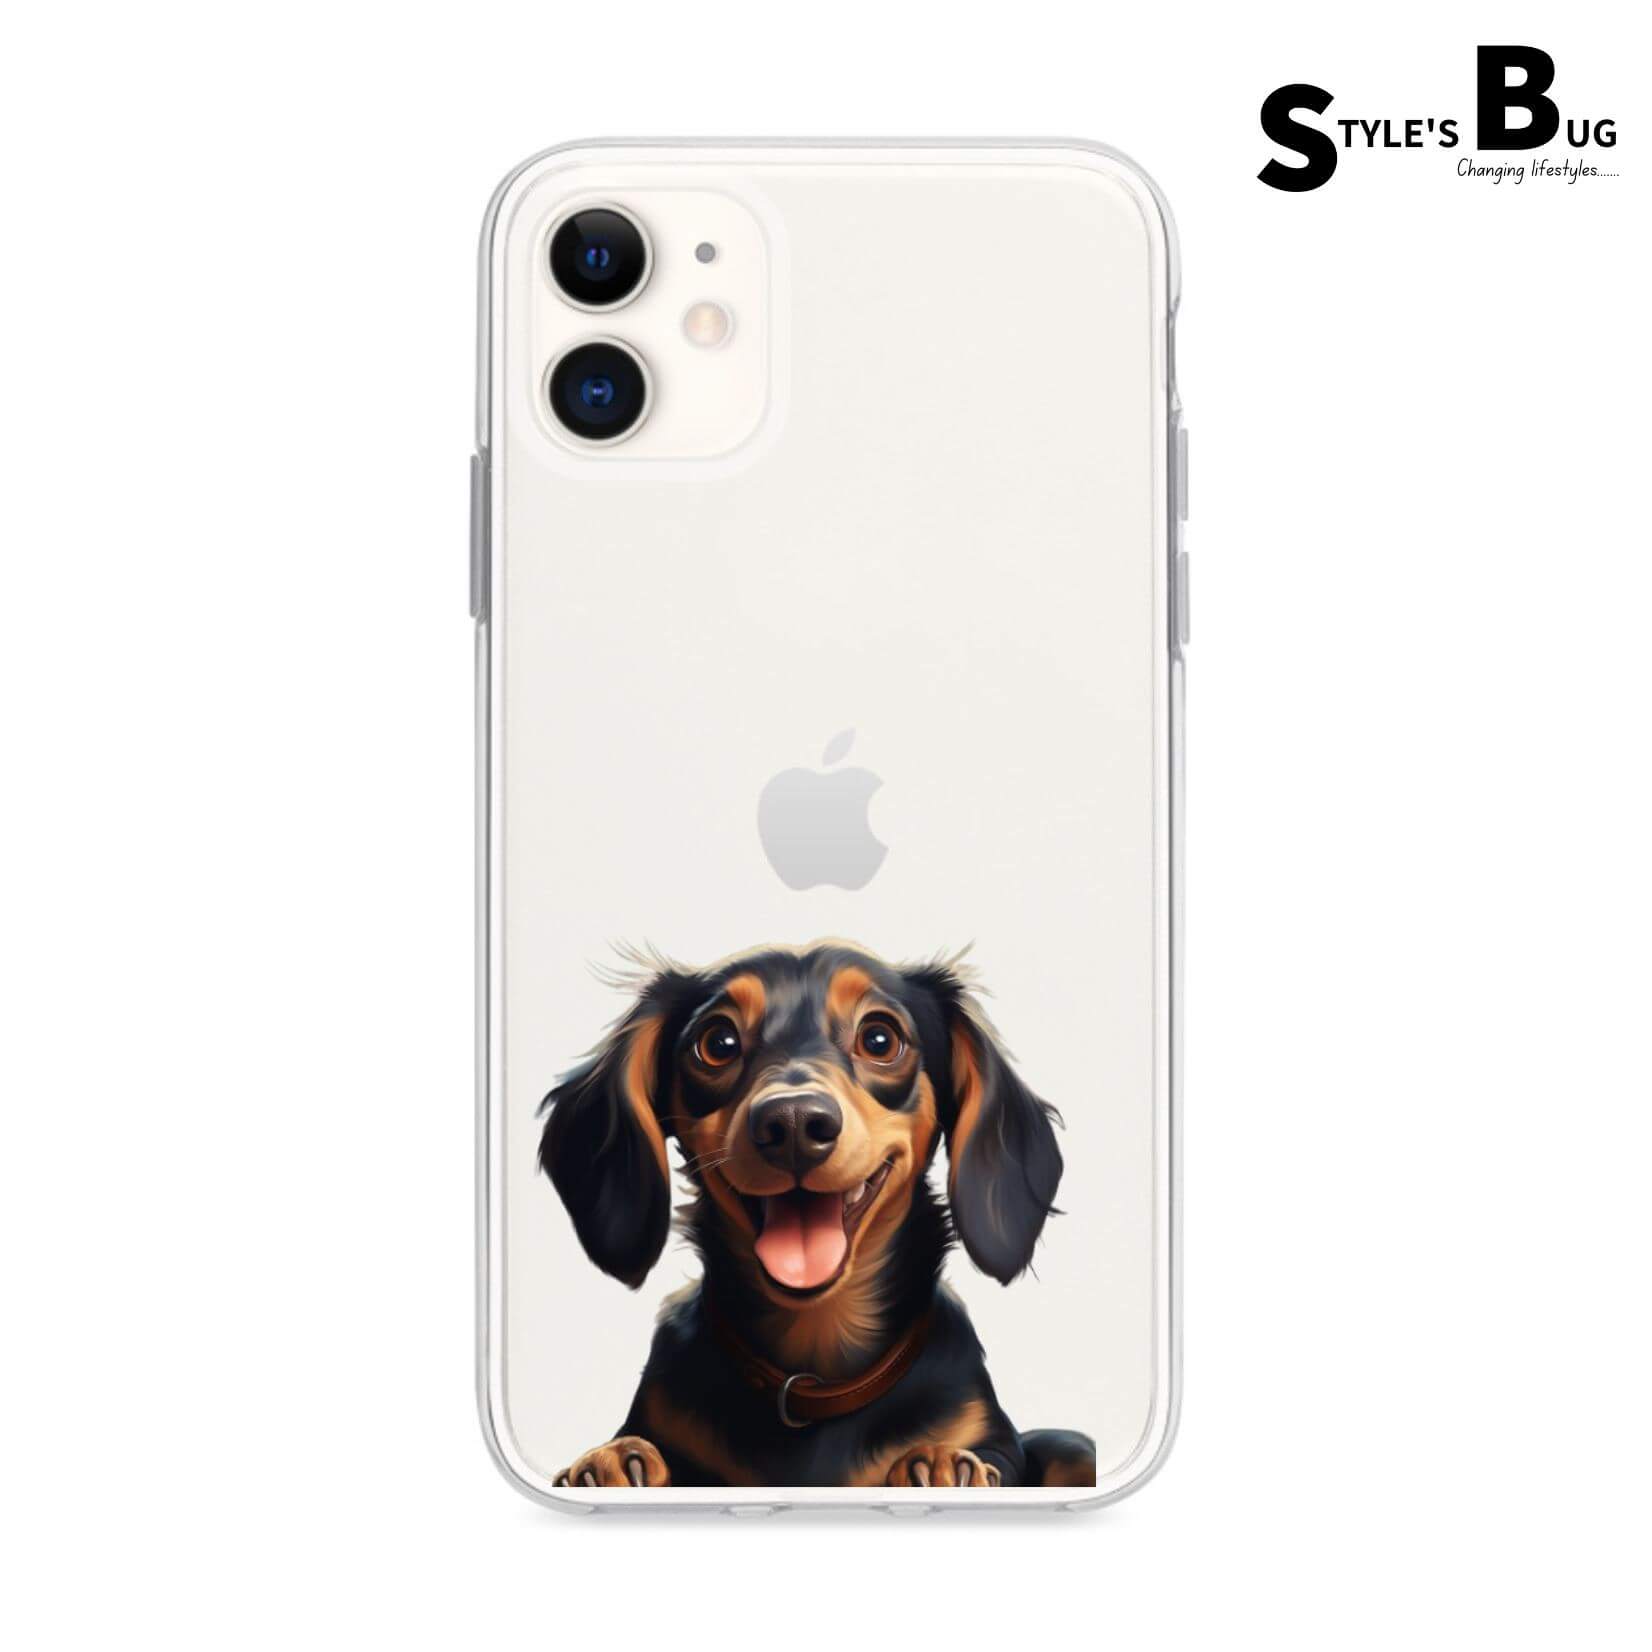 Smiling Dog phone cases from Style's Bug (UV printed) - Style's Bug Dachshund